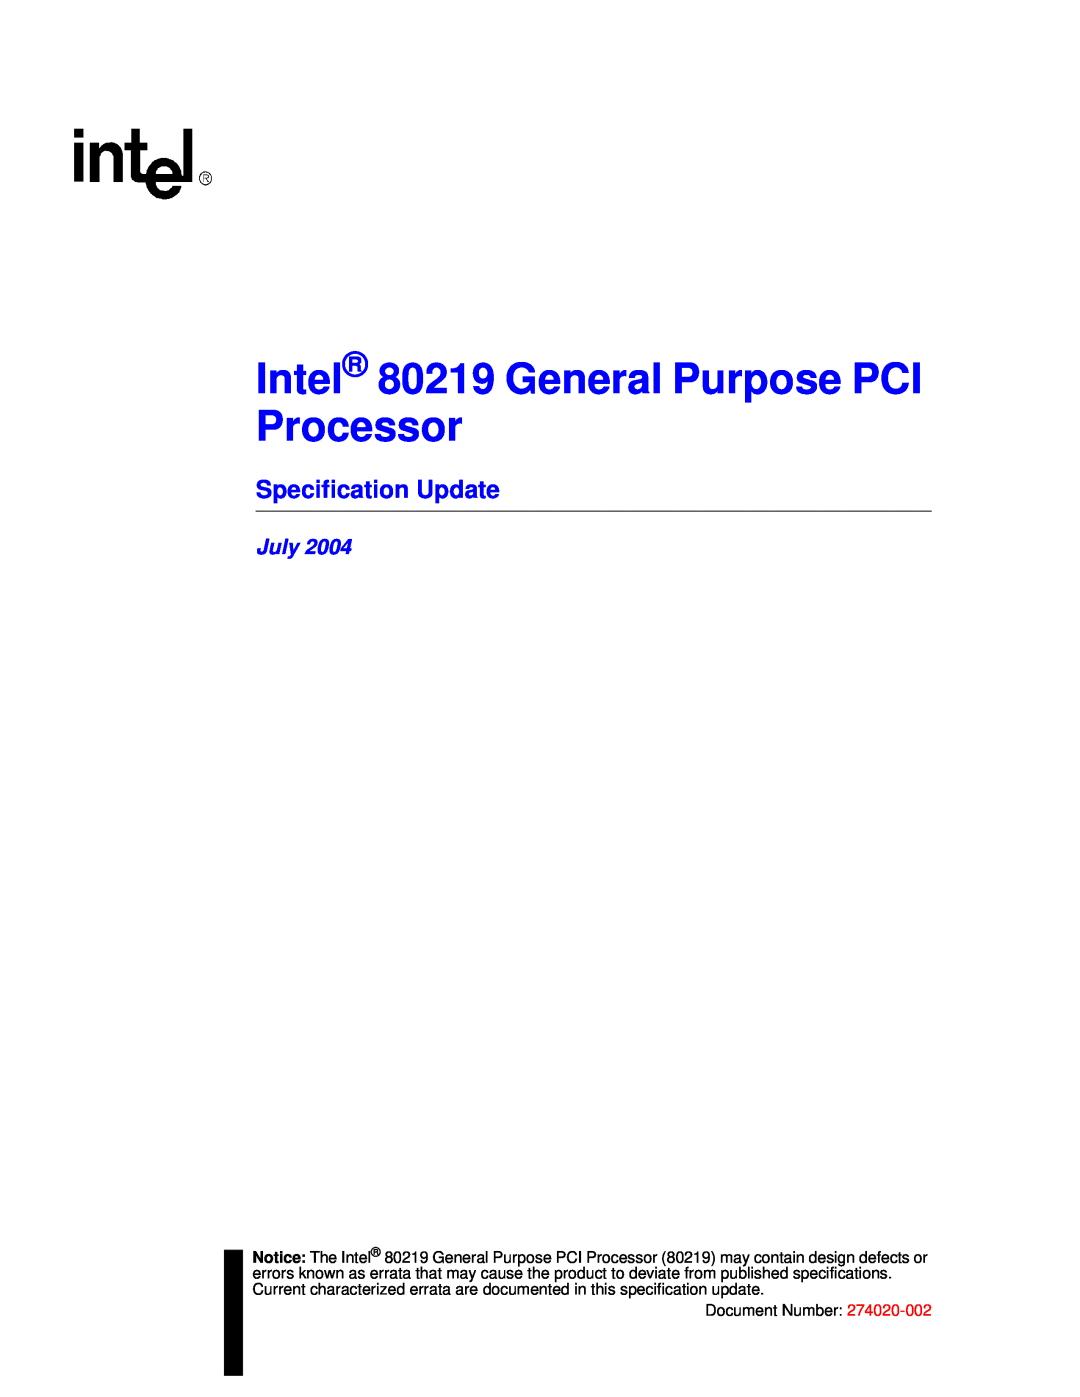 Intel specifications Specification Update, Intel 80219 General Purpose PCI Processor, July, Document Number 